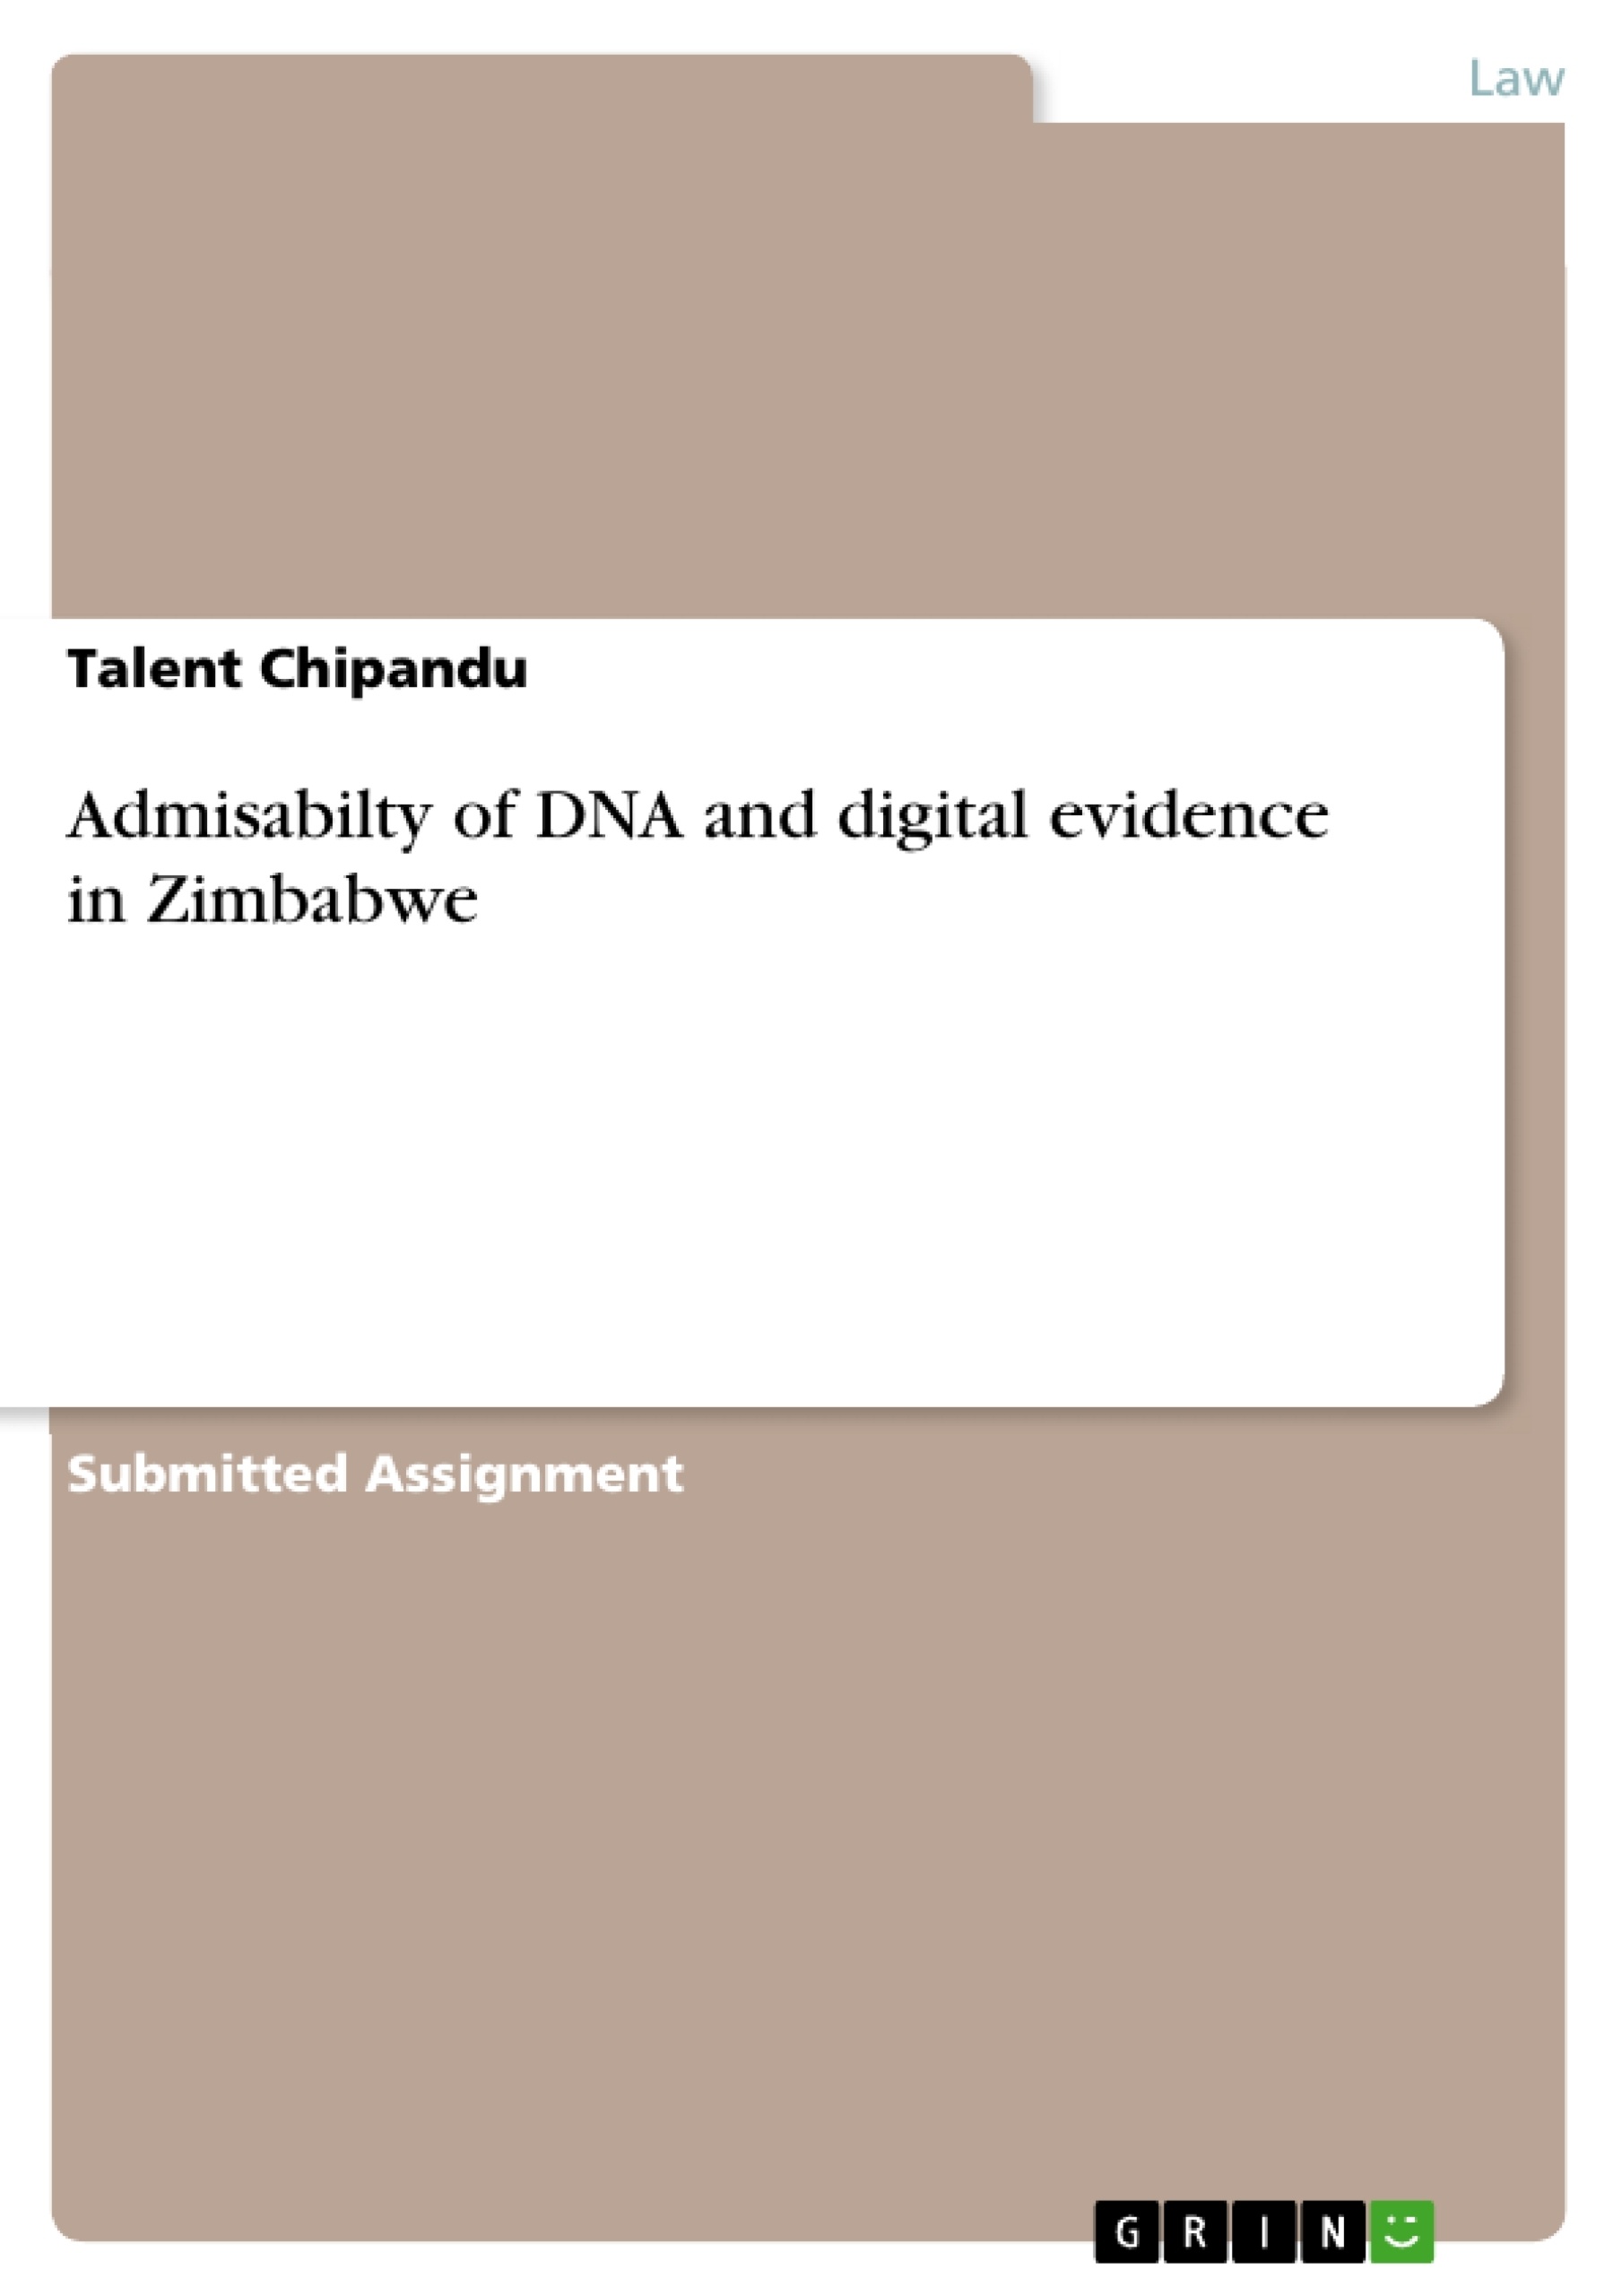 Title: Admisabilty of DNA and digital evidence in Zimbabwe